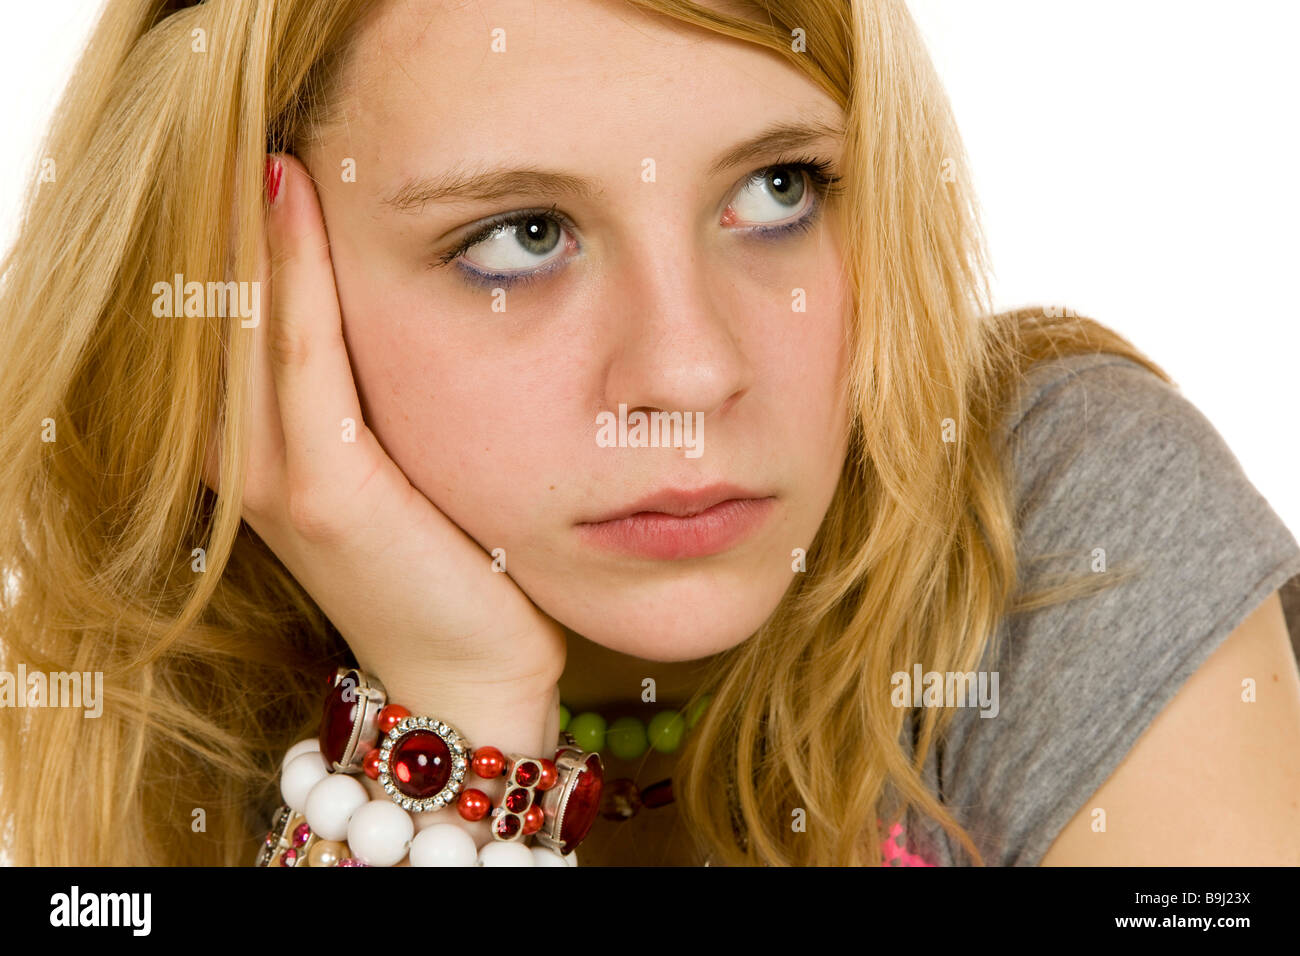 13-year-old girl leaning on her arm, dreamy or bored Stock Photo